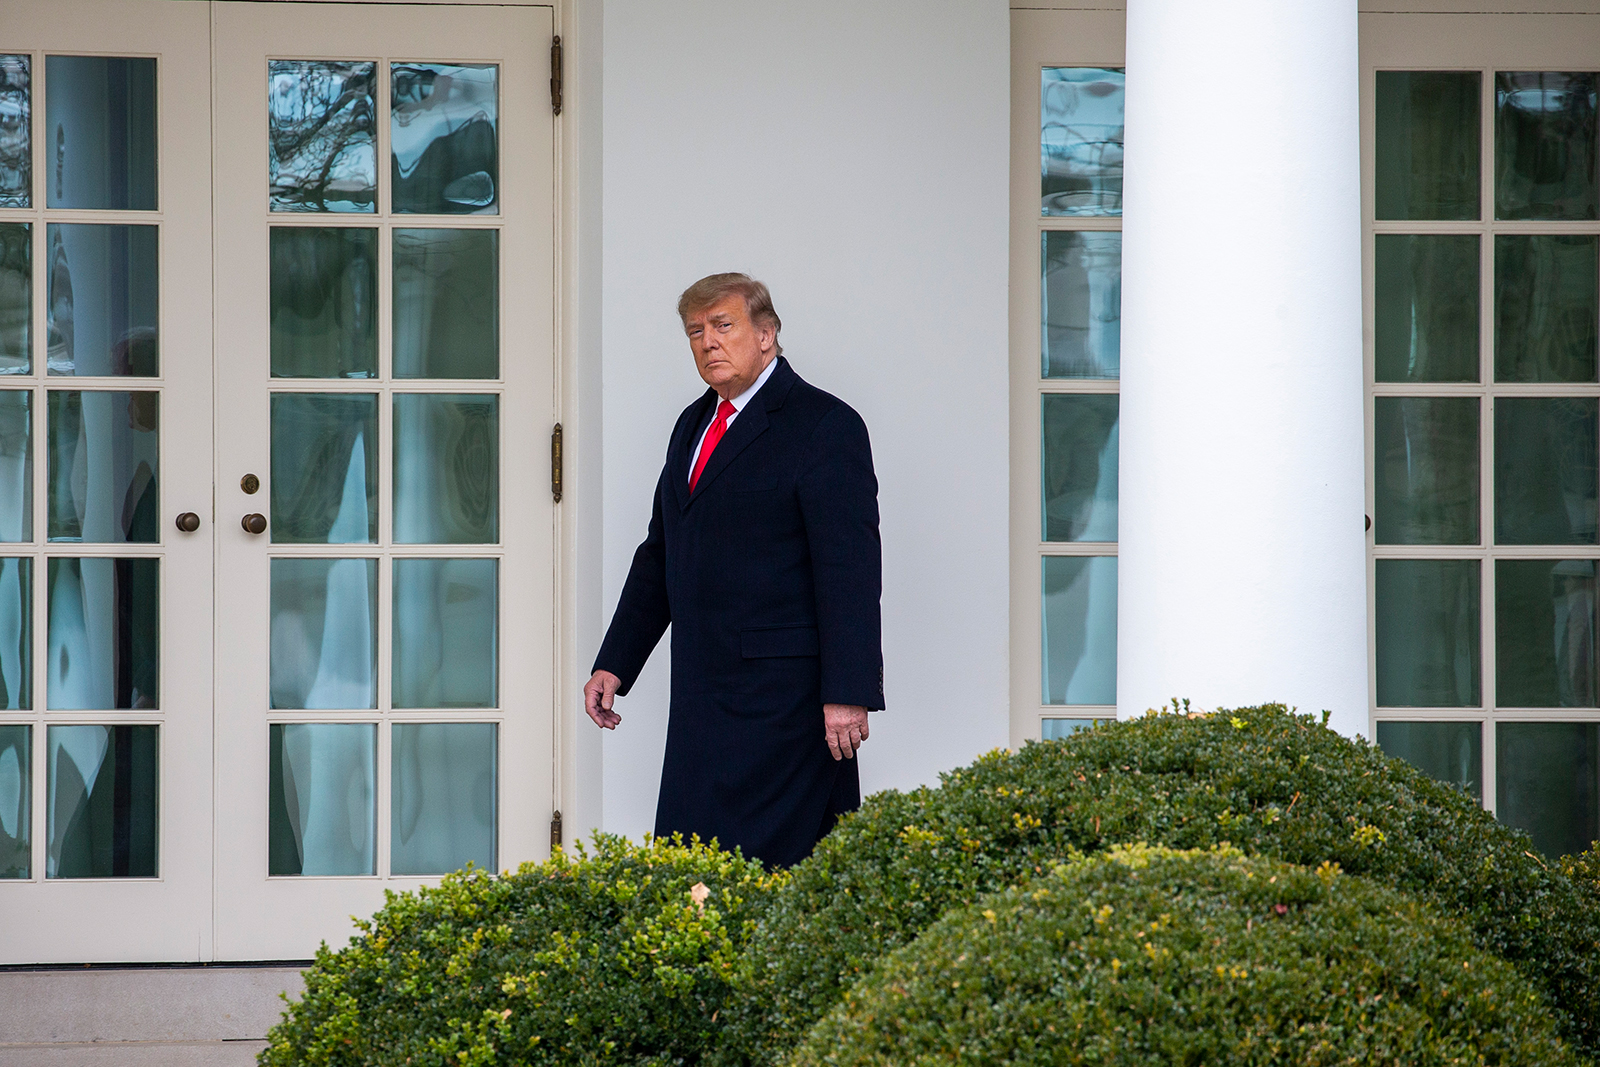 President Donald Trump walks to the Oval Office while arriving back at the White House in Washington, DC, on December 31, 2020.